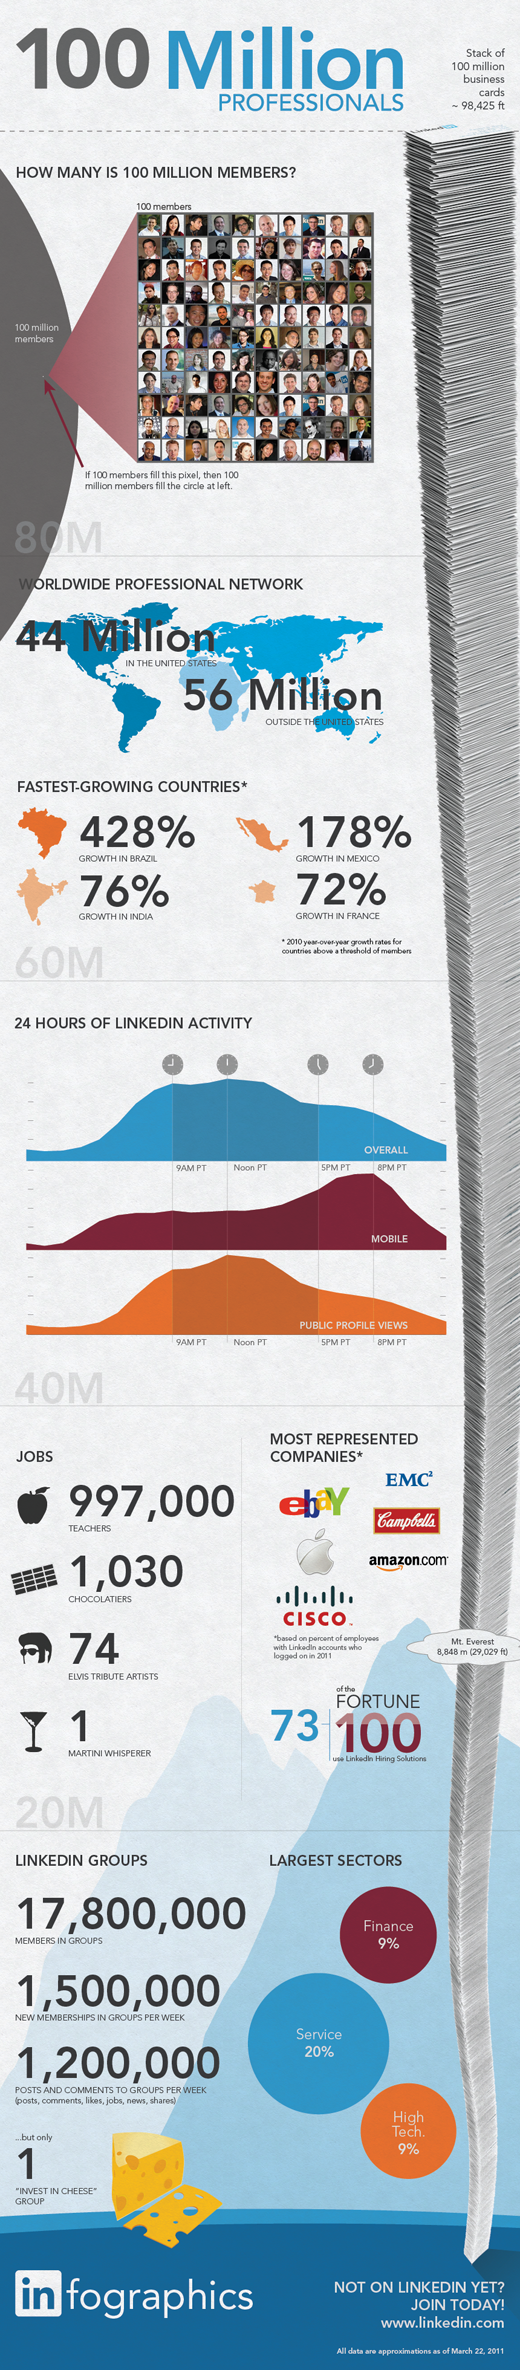 12 Awesome LinkedIn Infographics in 2011